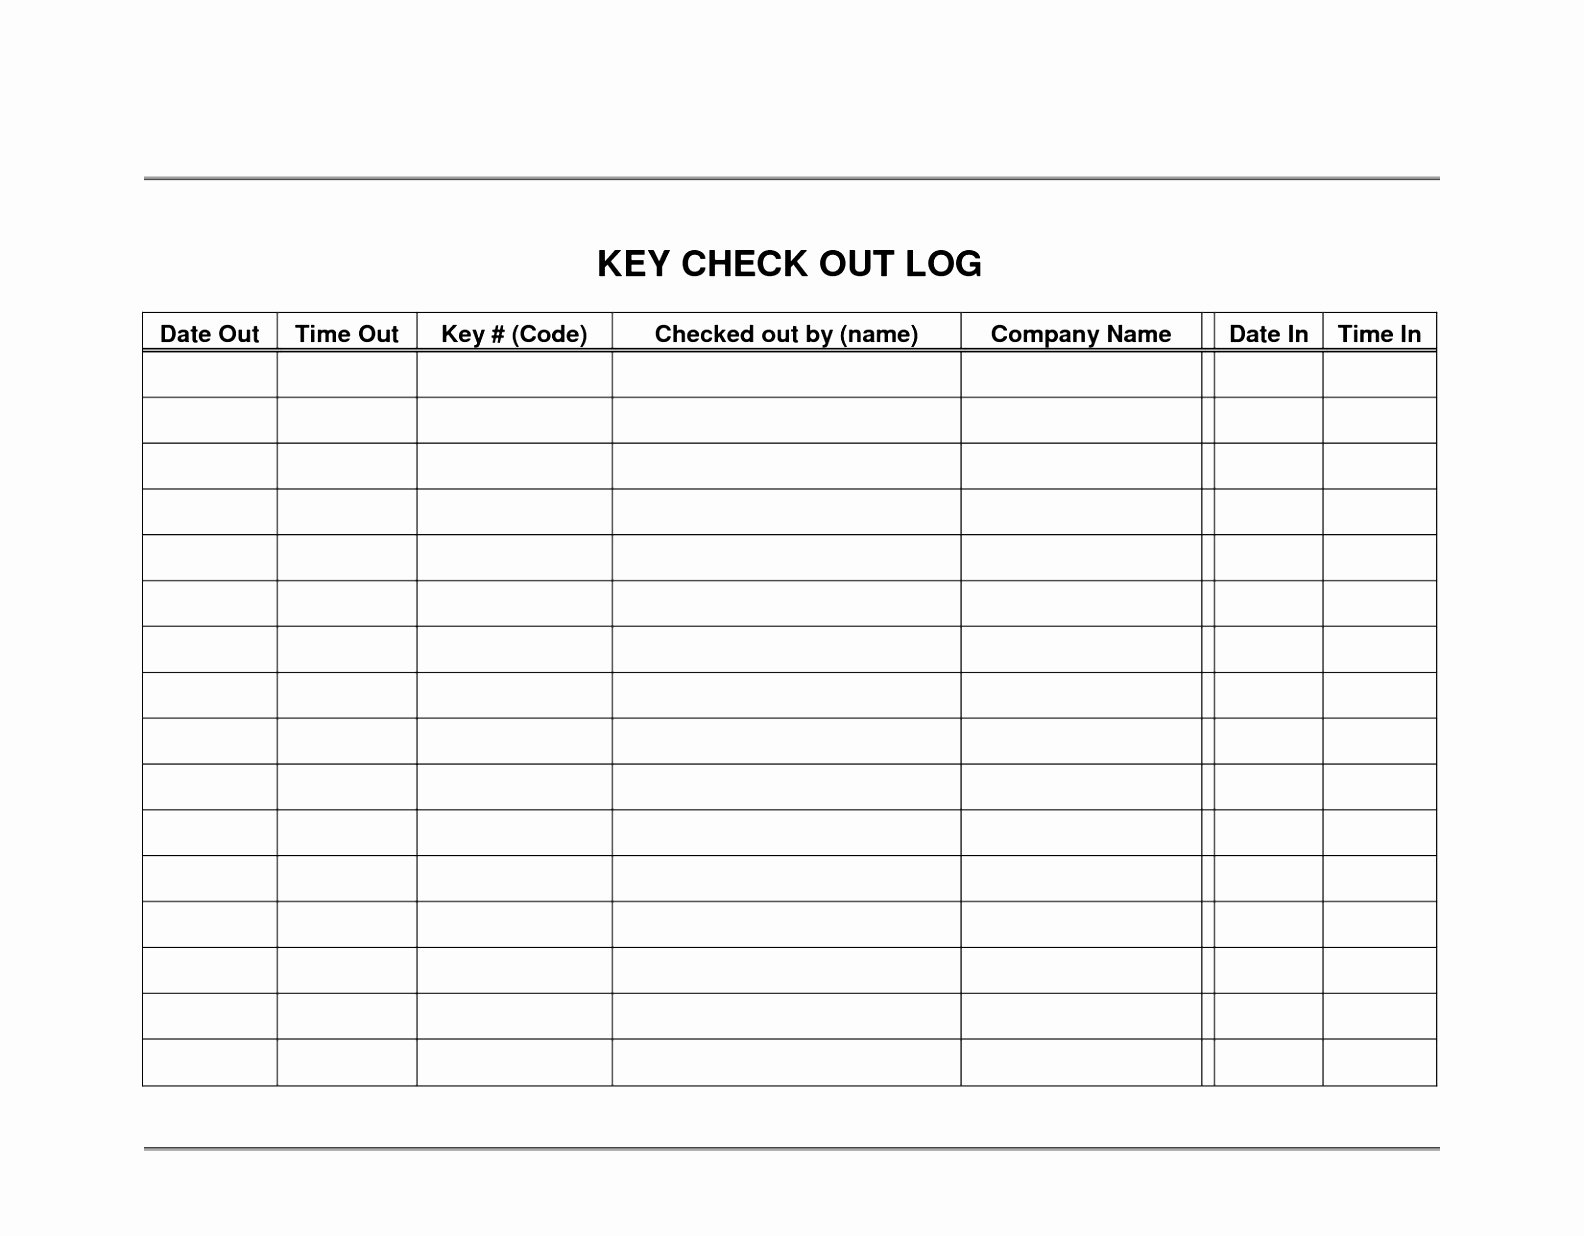 Equipment Checkout form Template Lovely 6 Check Out form Template Ierwr